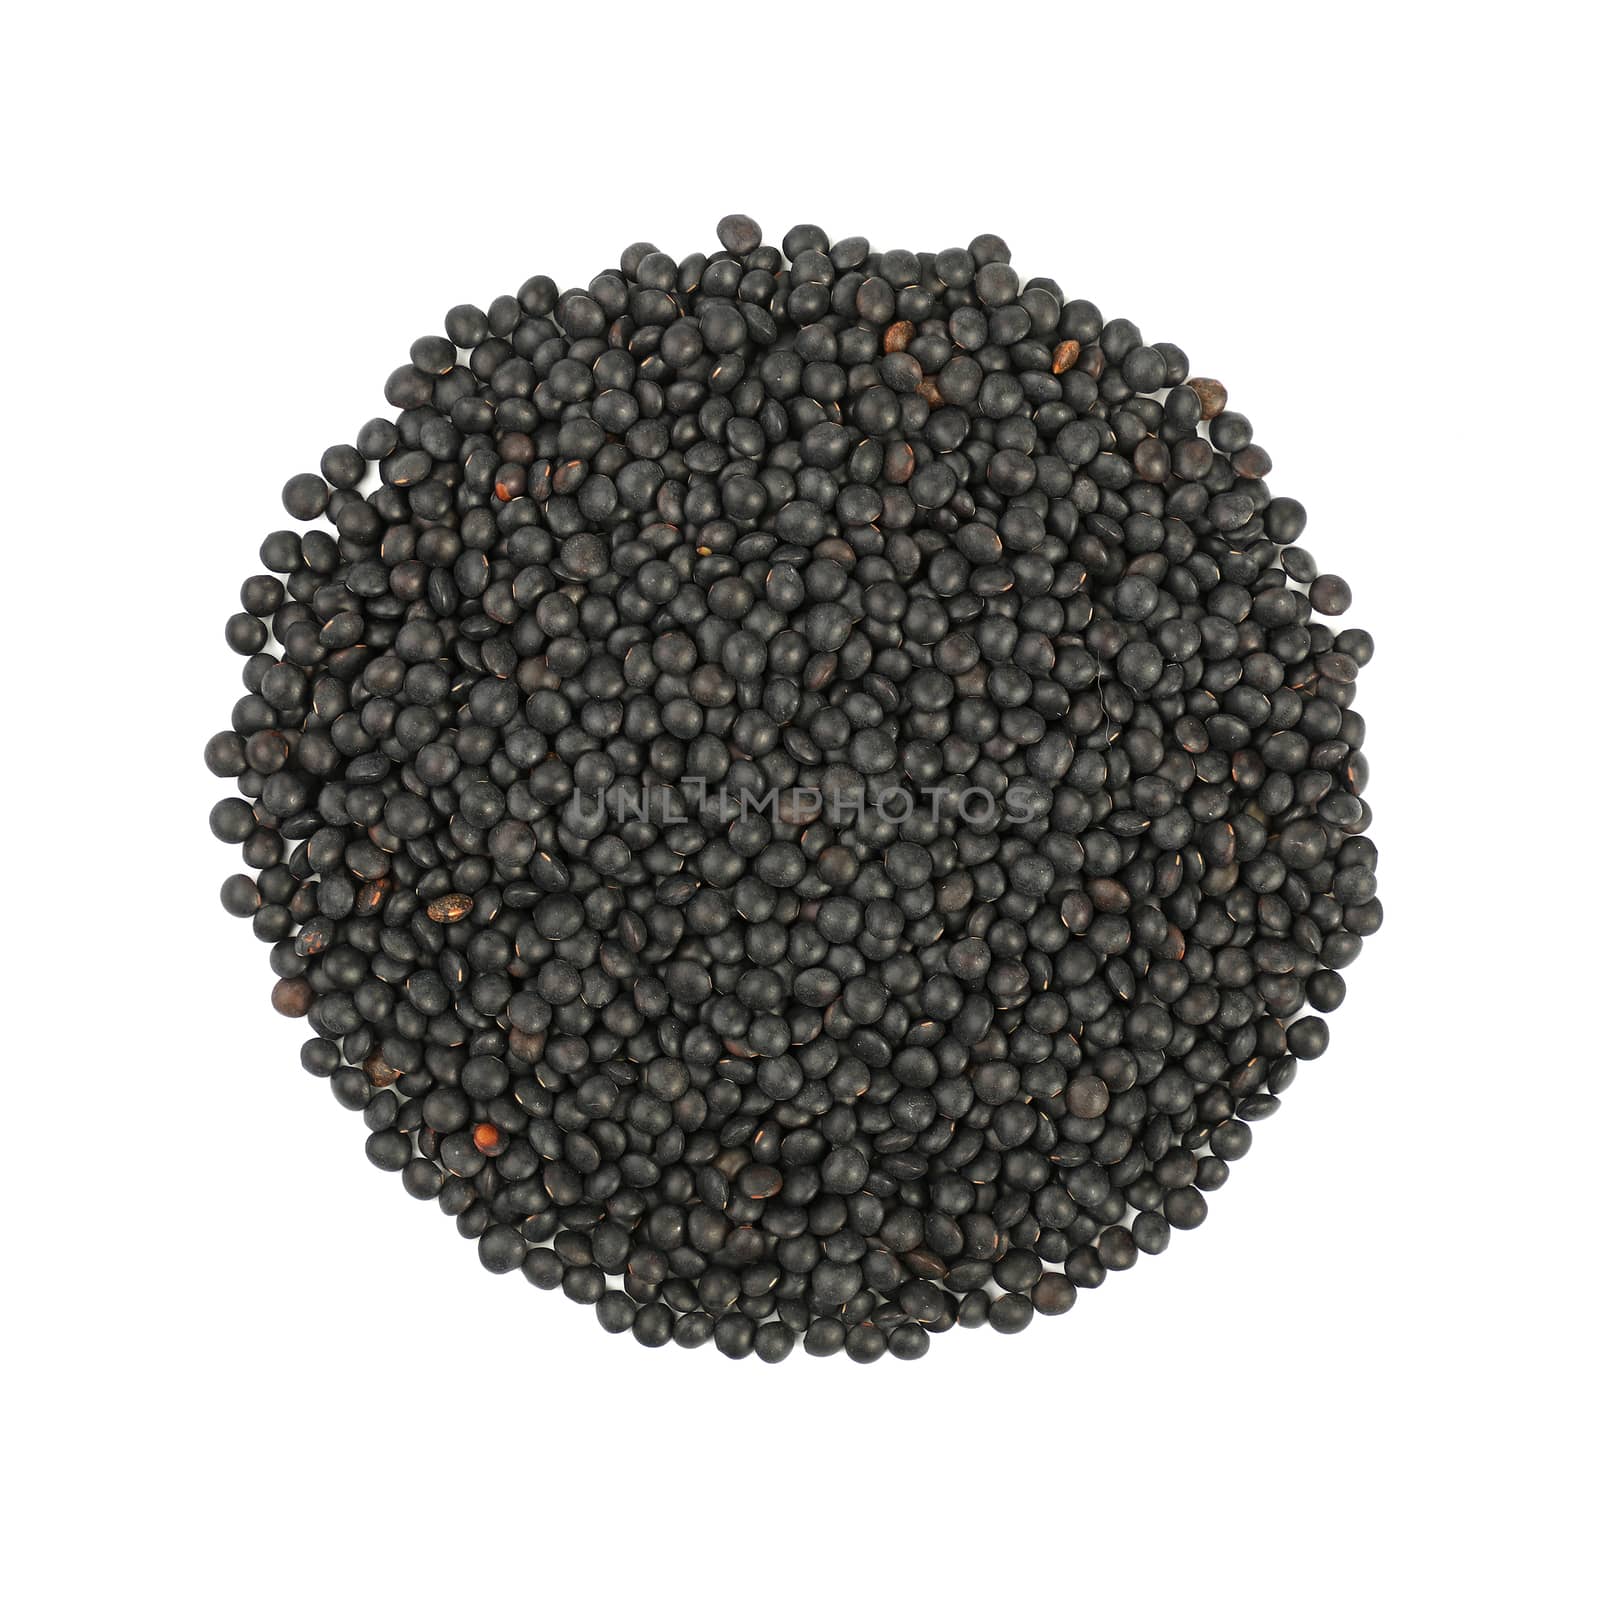 Round shaped black Beluga lentil lens isolated on white background, close up, elevated top view